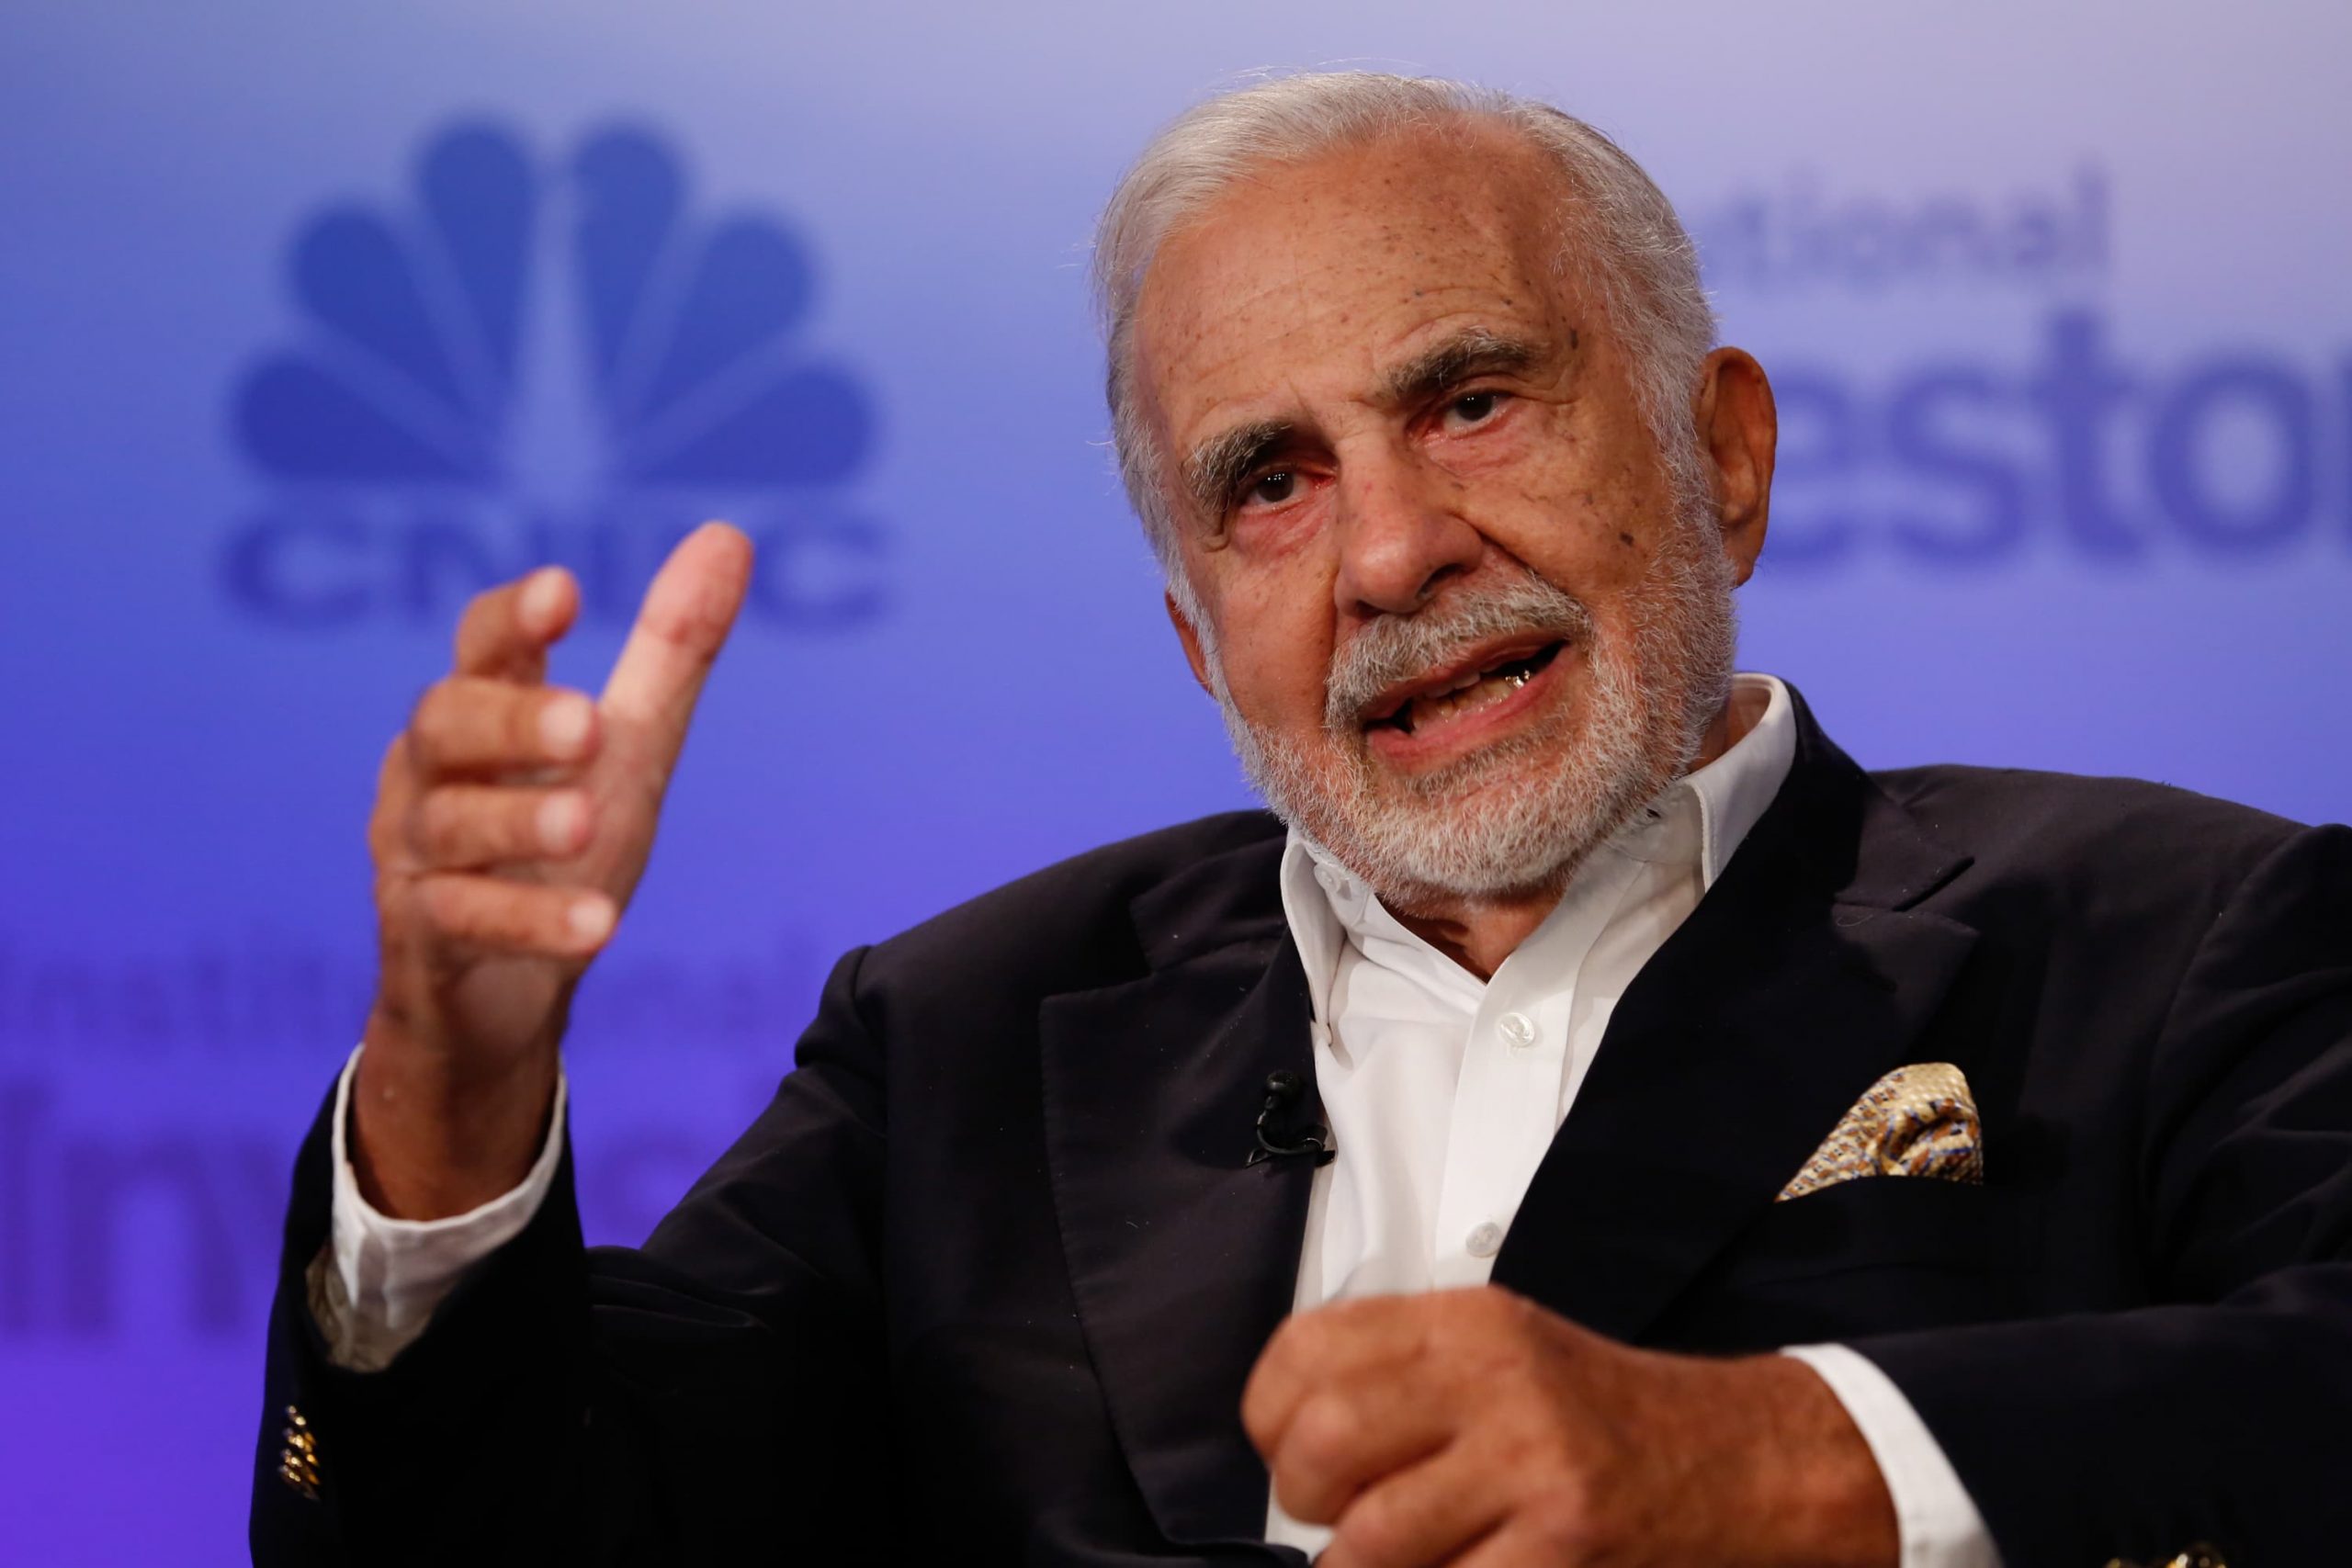 Carl Icahn is warning that the market rally could end in a painful correction and hedge accordingly